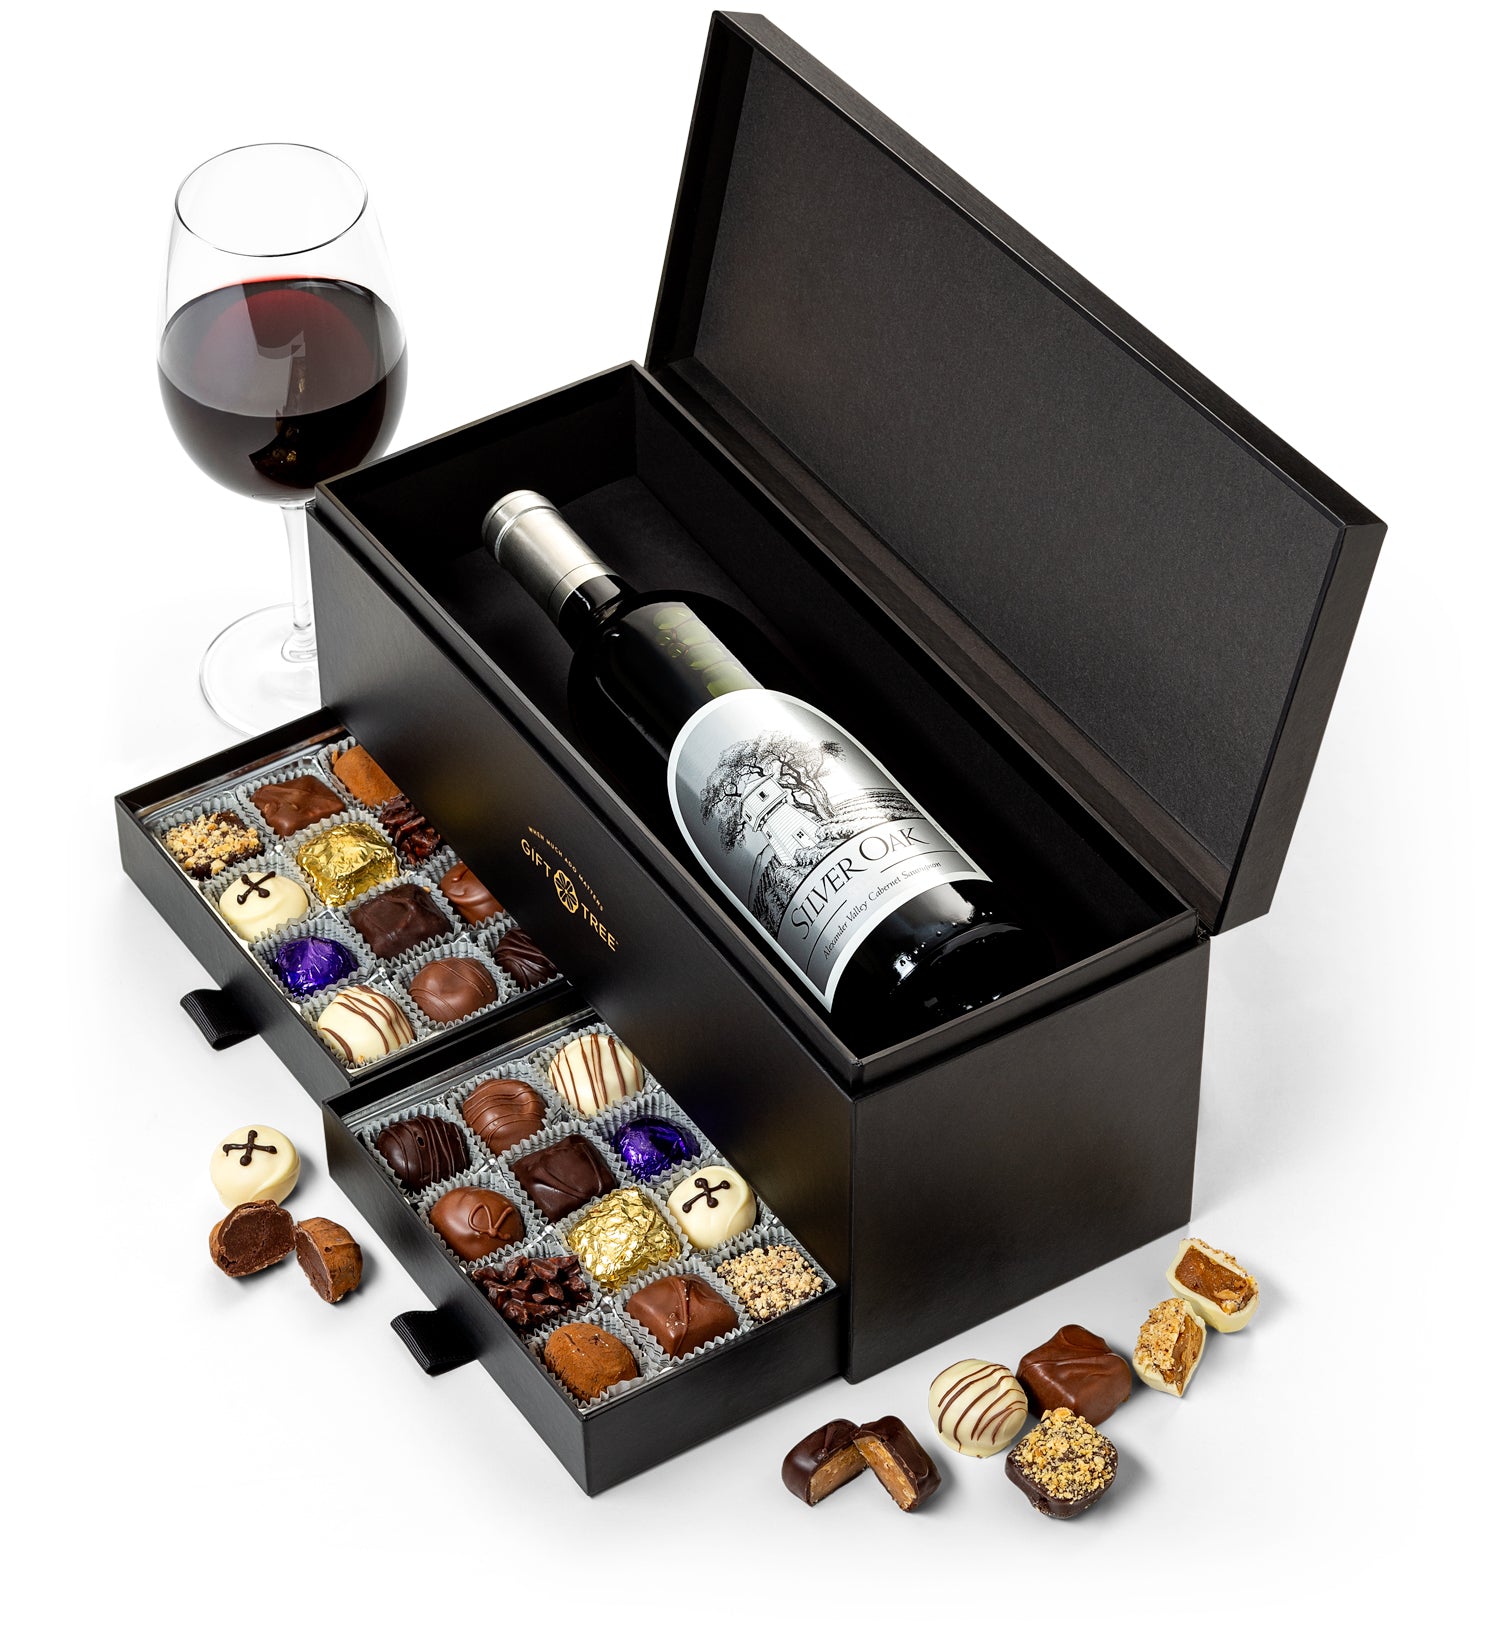 Silver Oak Cabernet and Chocolate Pairing